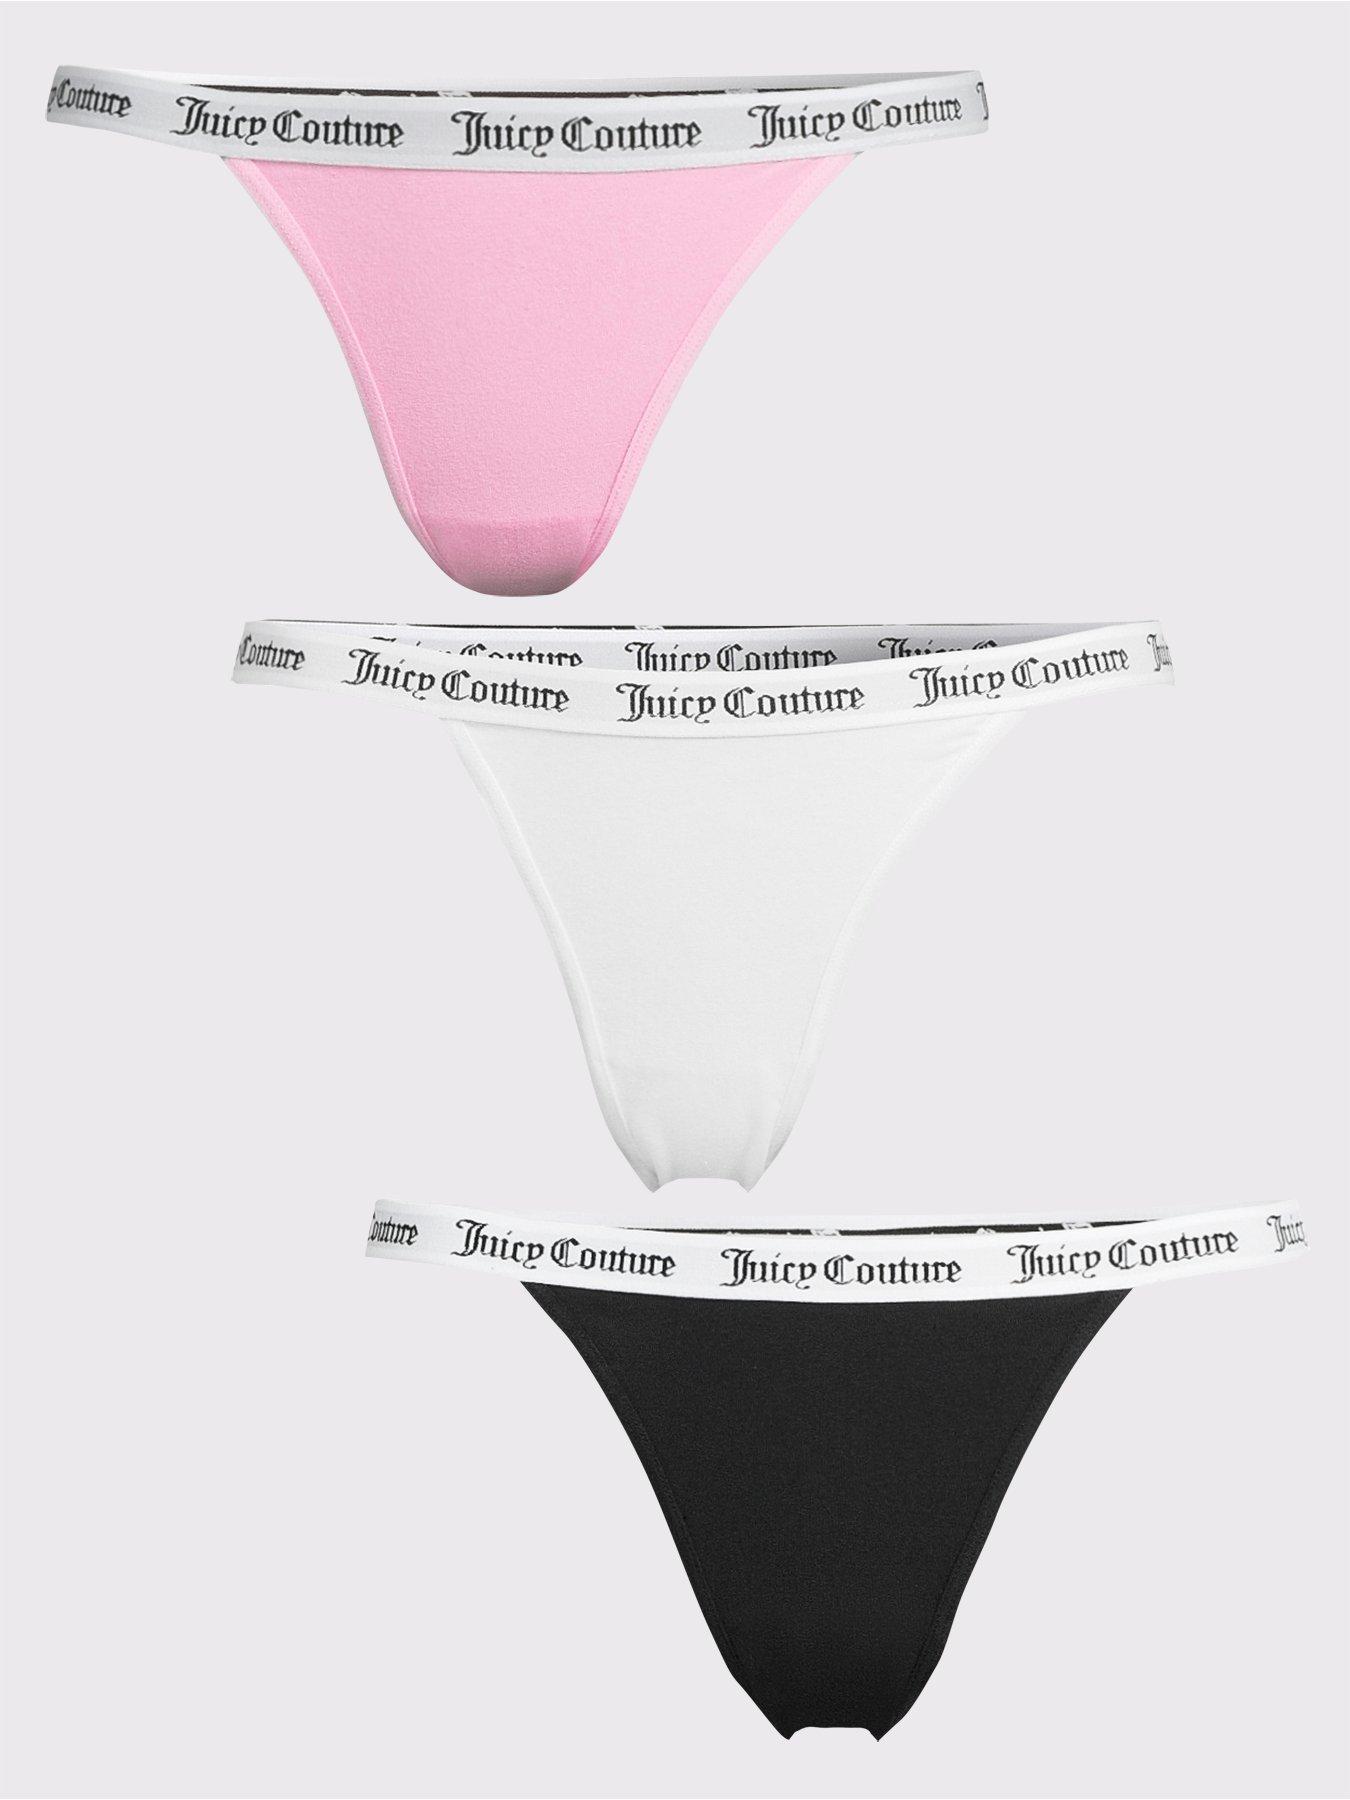 Juicy Couture Intimates Panties | sz. Large 3 Pack | NWT